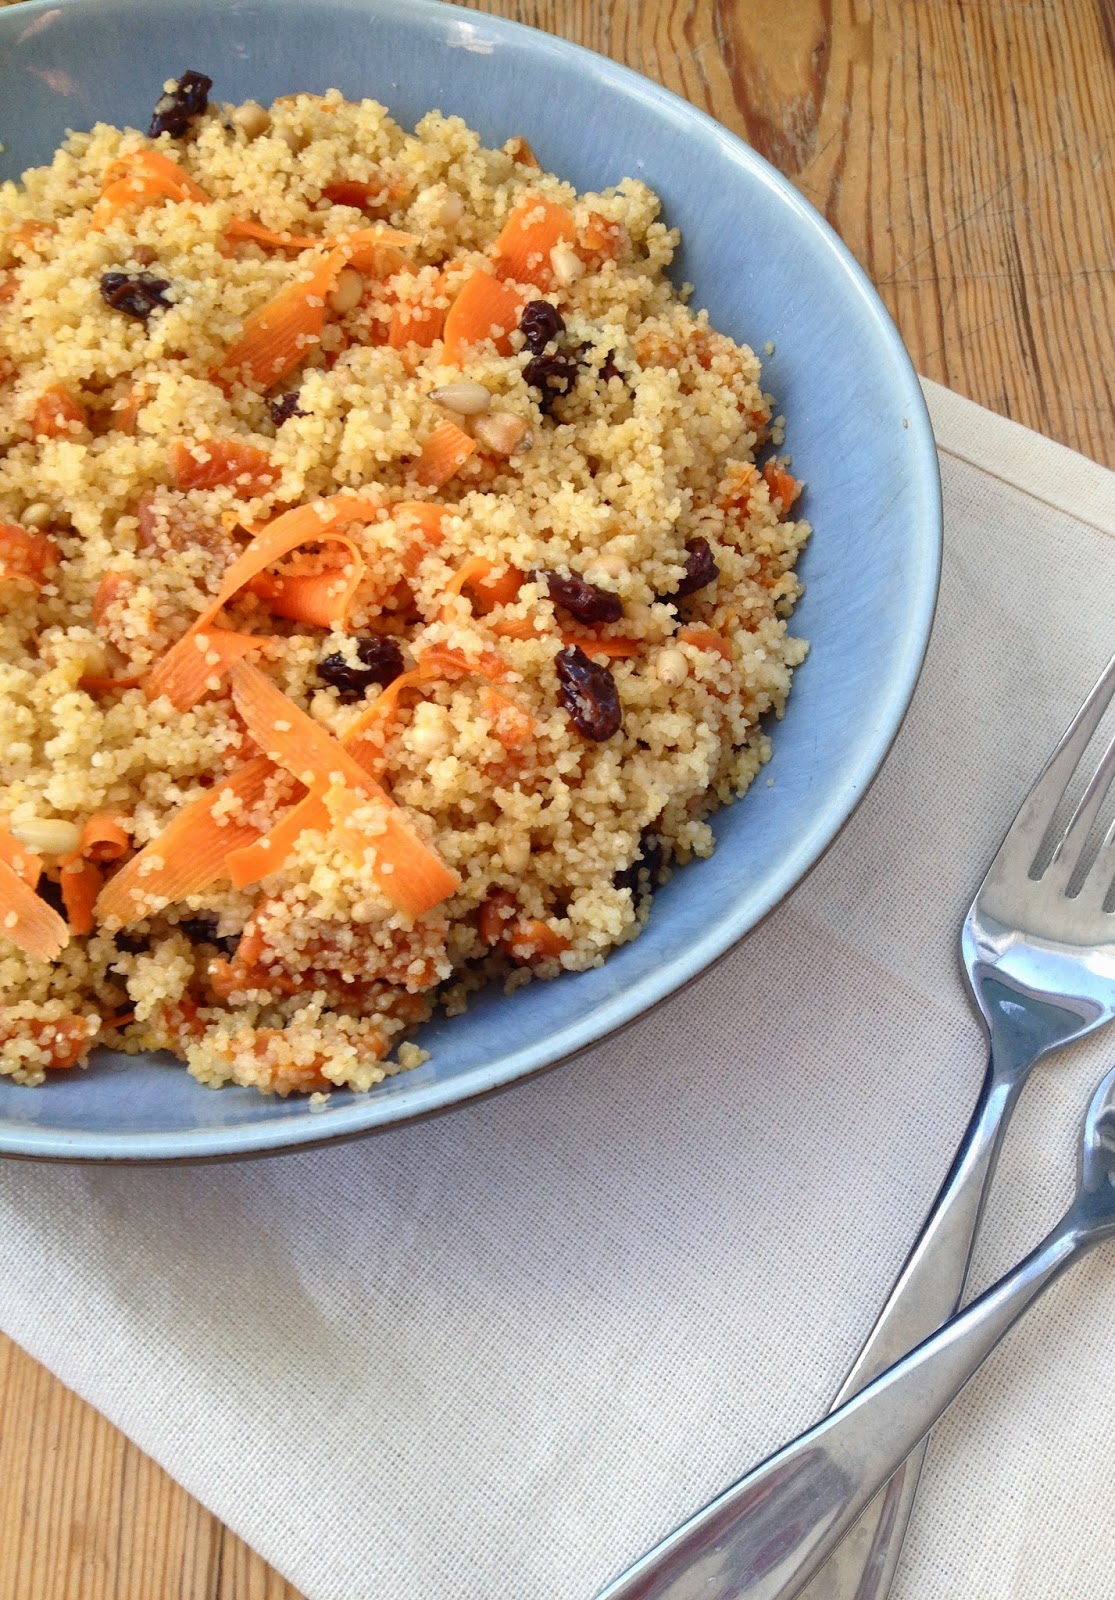 Orange and Dried Apricot Couscous